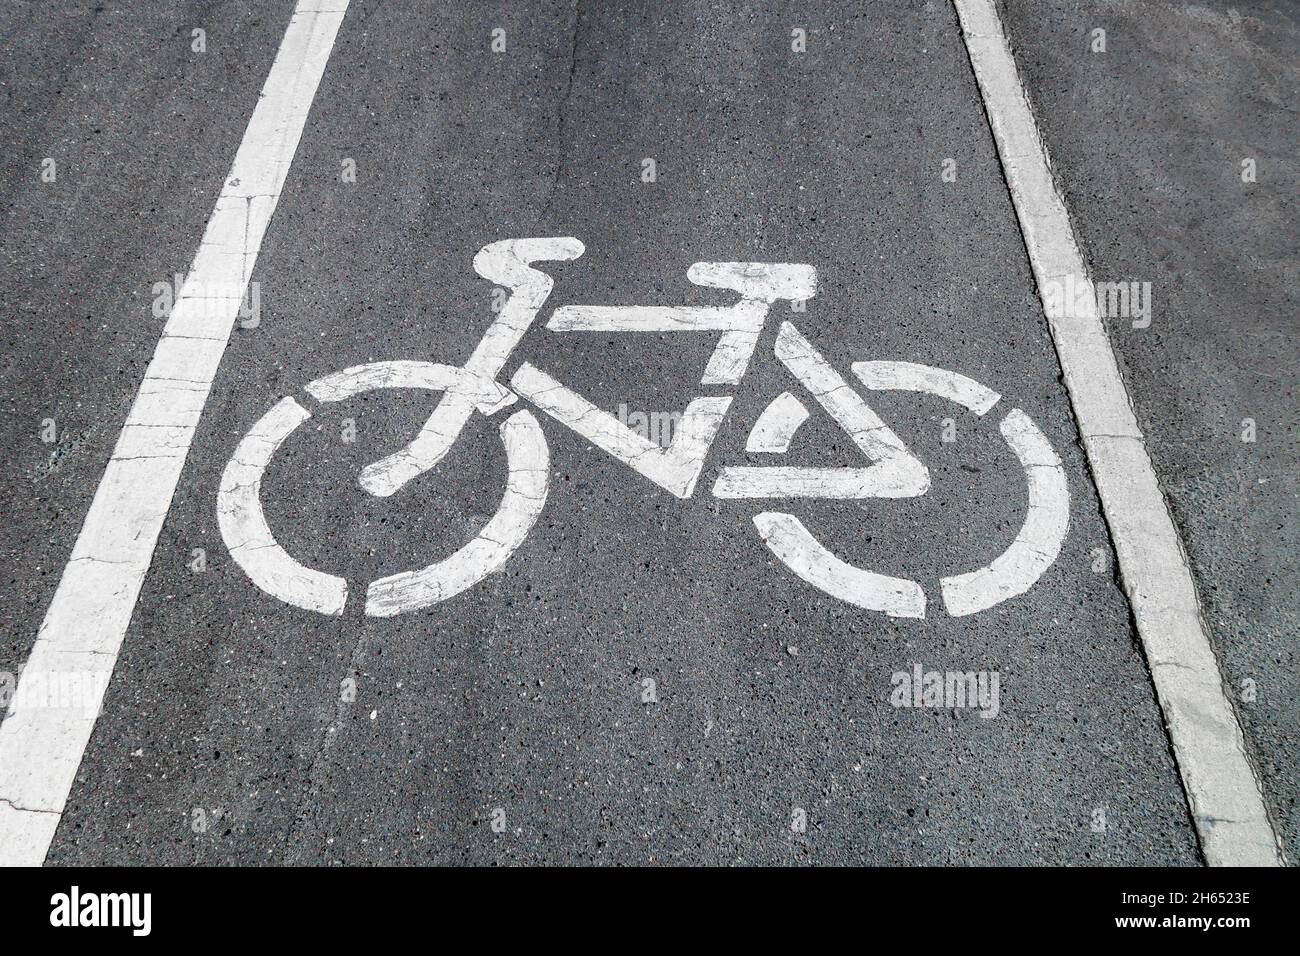 Bicycle painted on asphalt, marking track for cyclists Stock Photo